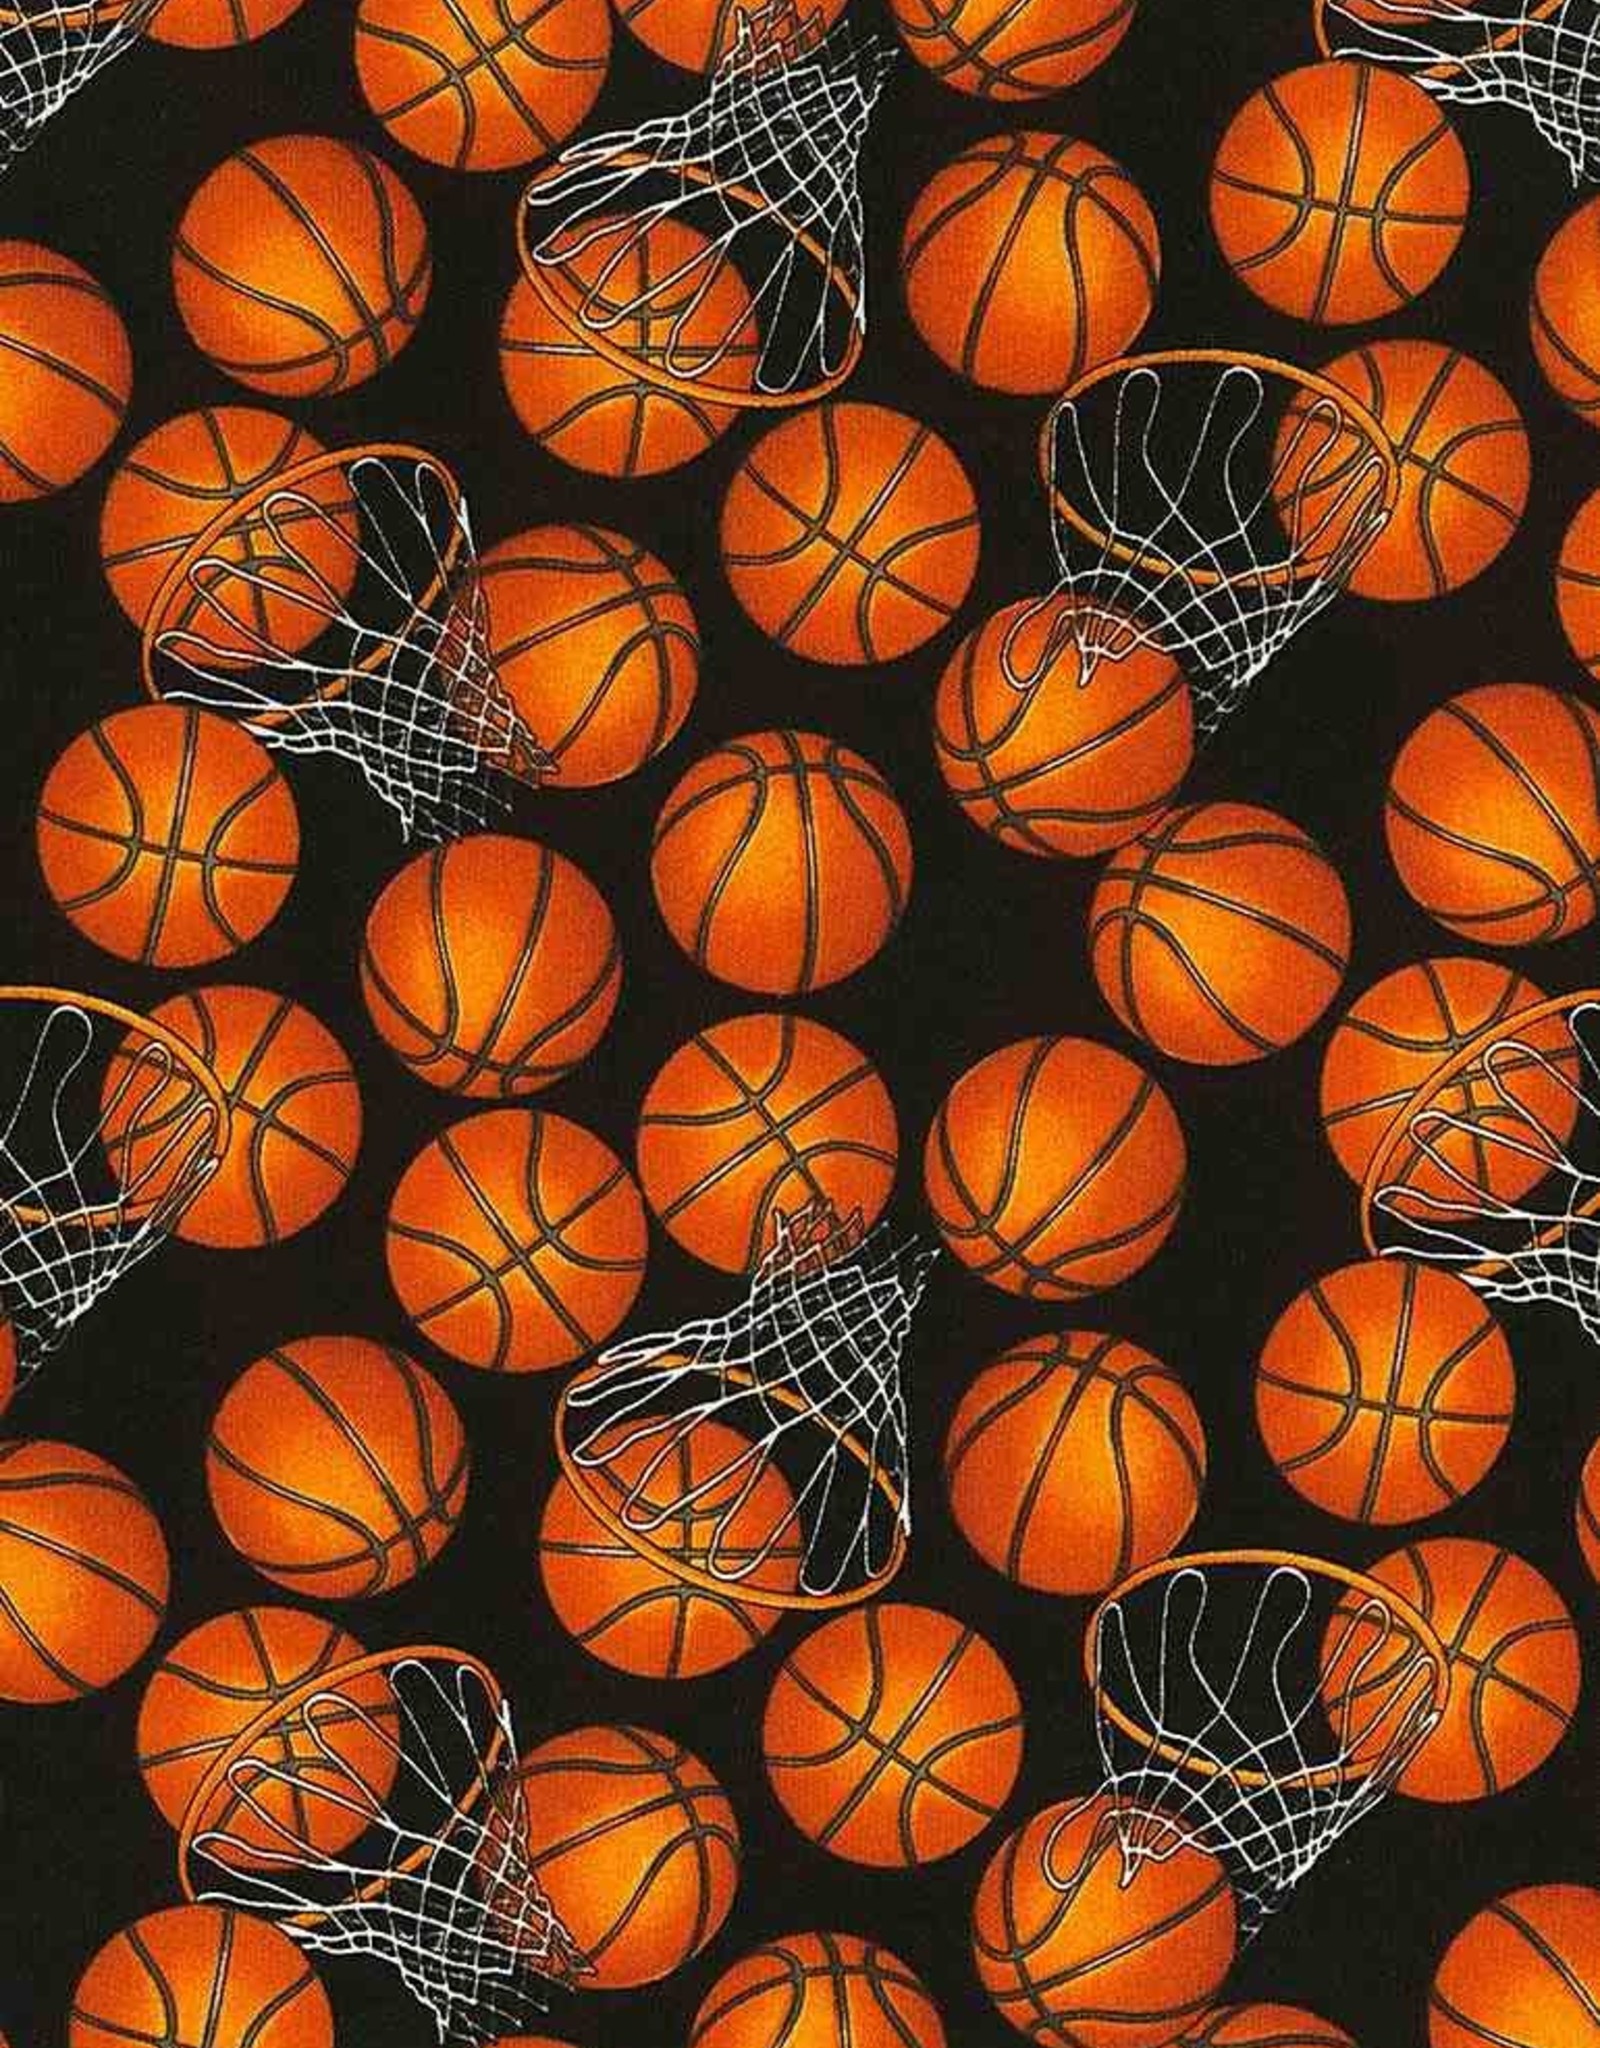 Basketball and Hoops (1/2m)